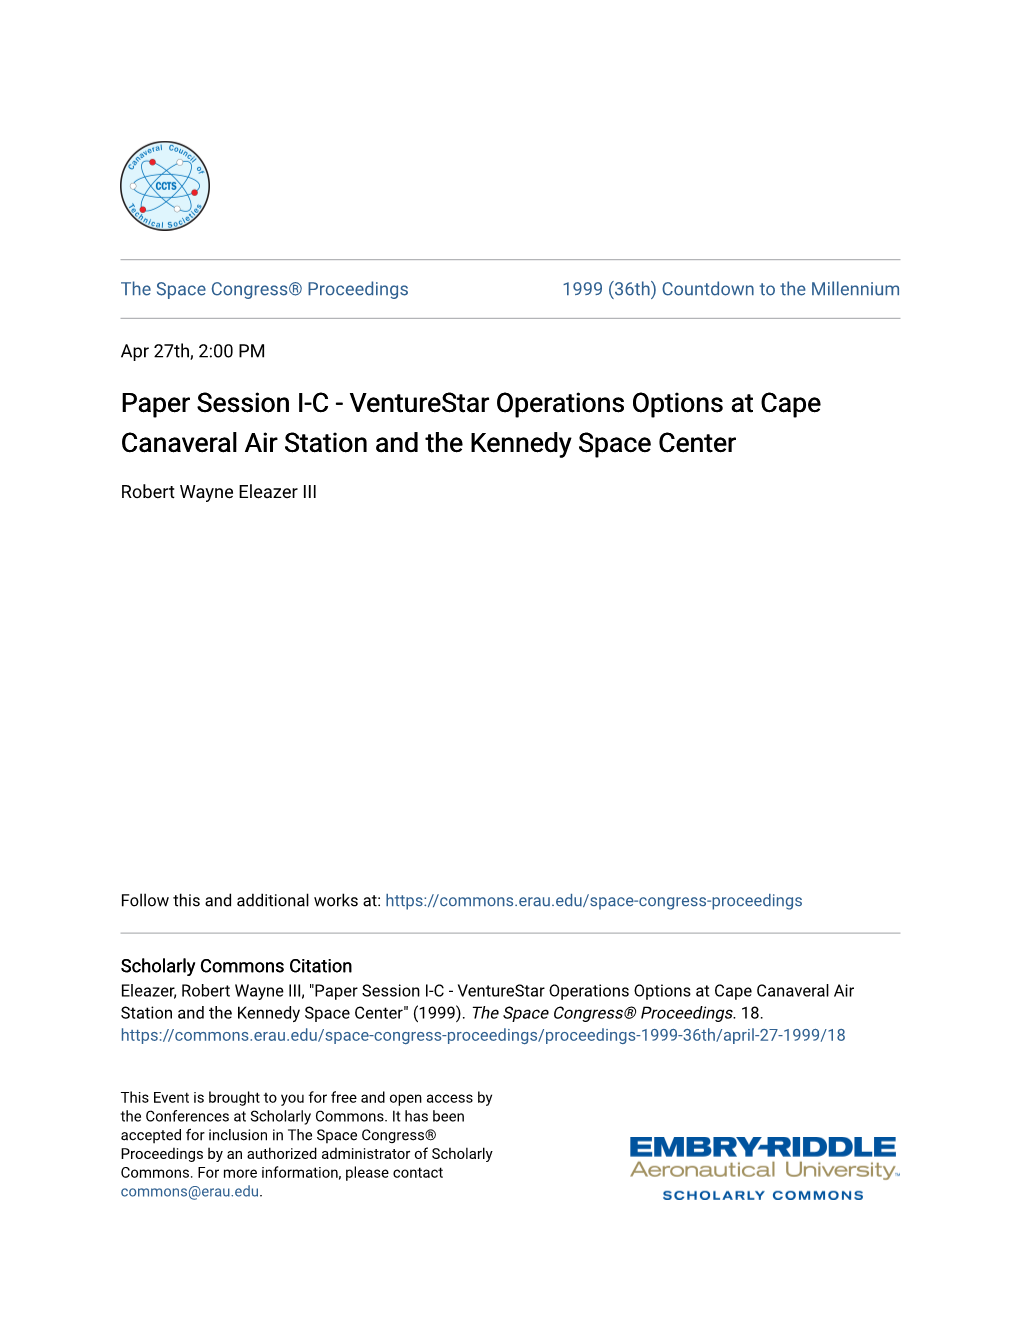 Paper Session IC-Venturestar Operations Options at Cape